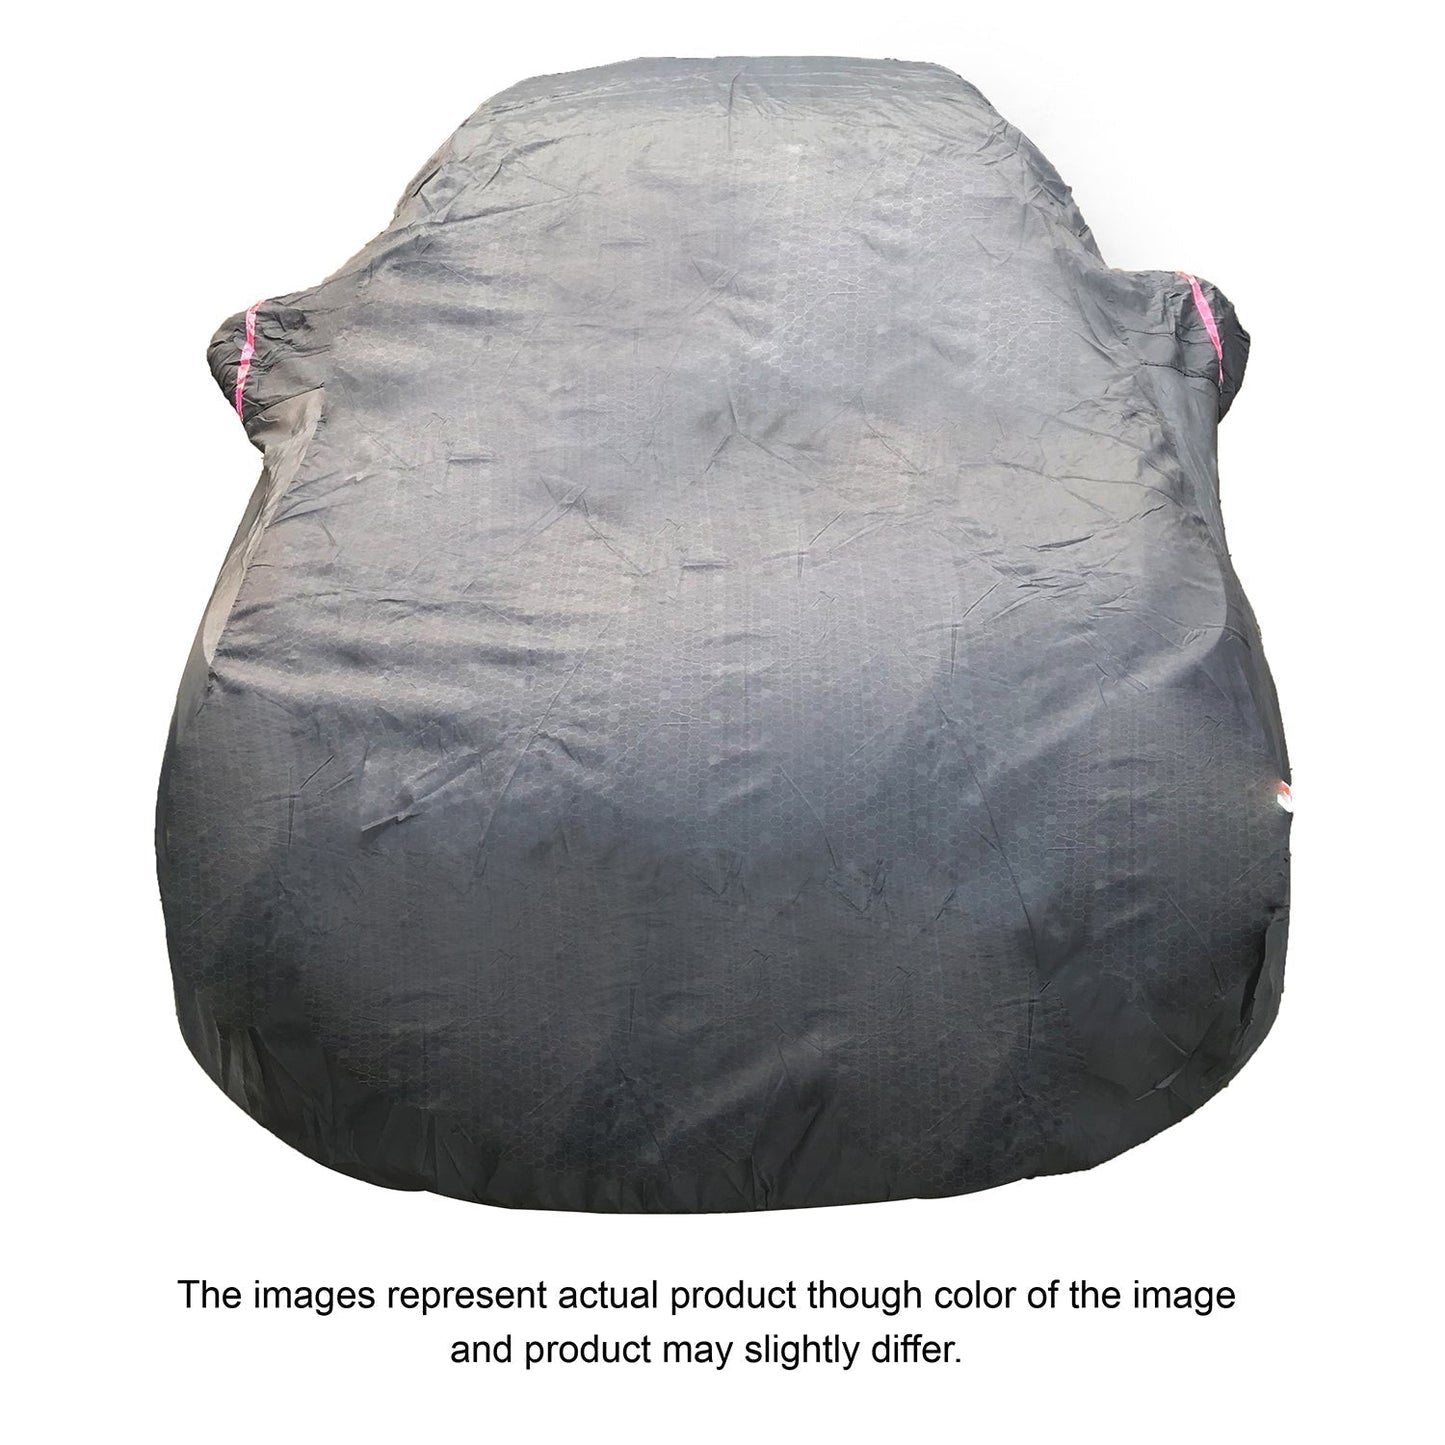 Oshotto 100% Dust Proof, Water Resistant Grey Car Body Cover with Mirror Pocket For Hyundai i10